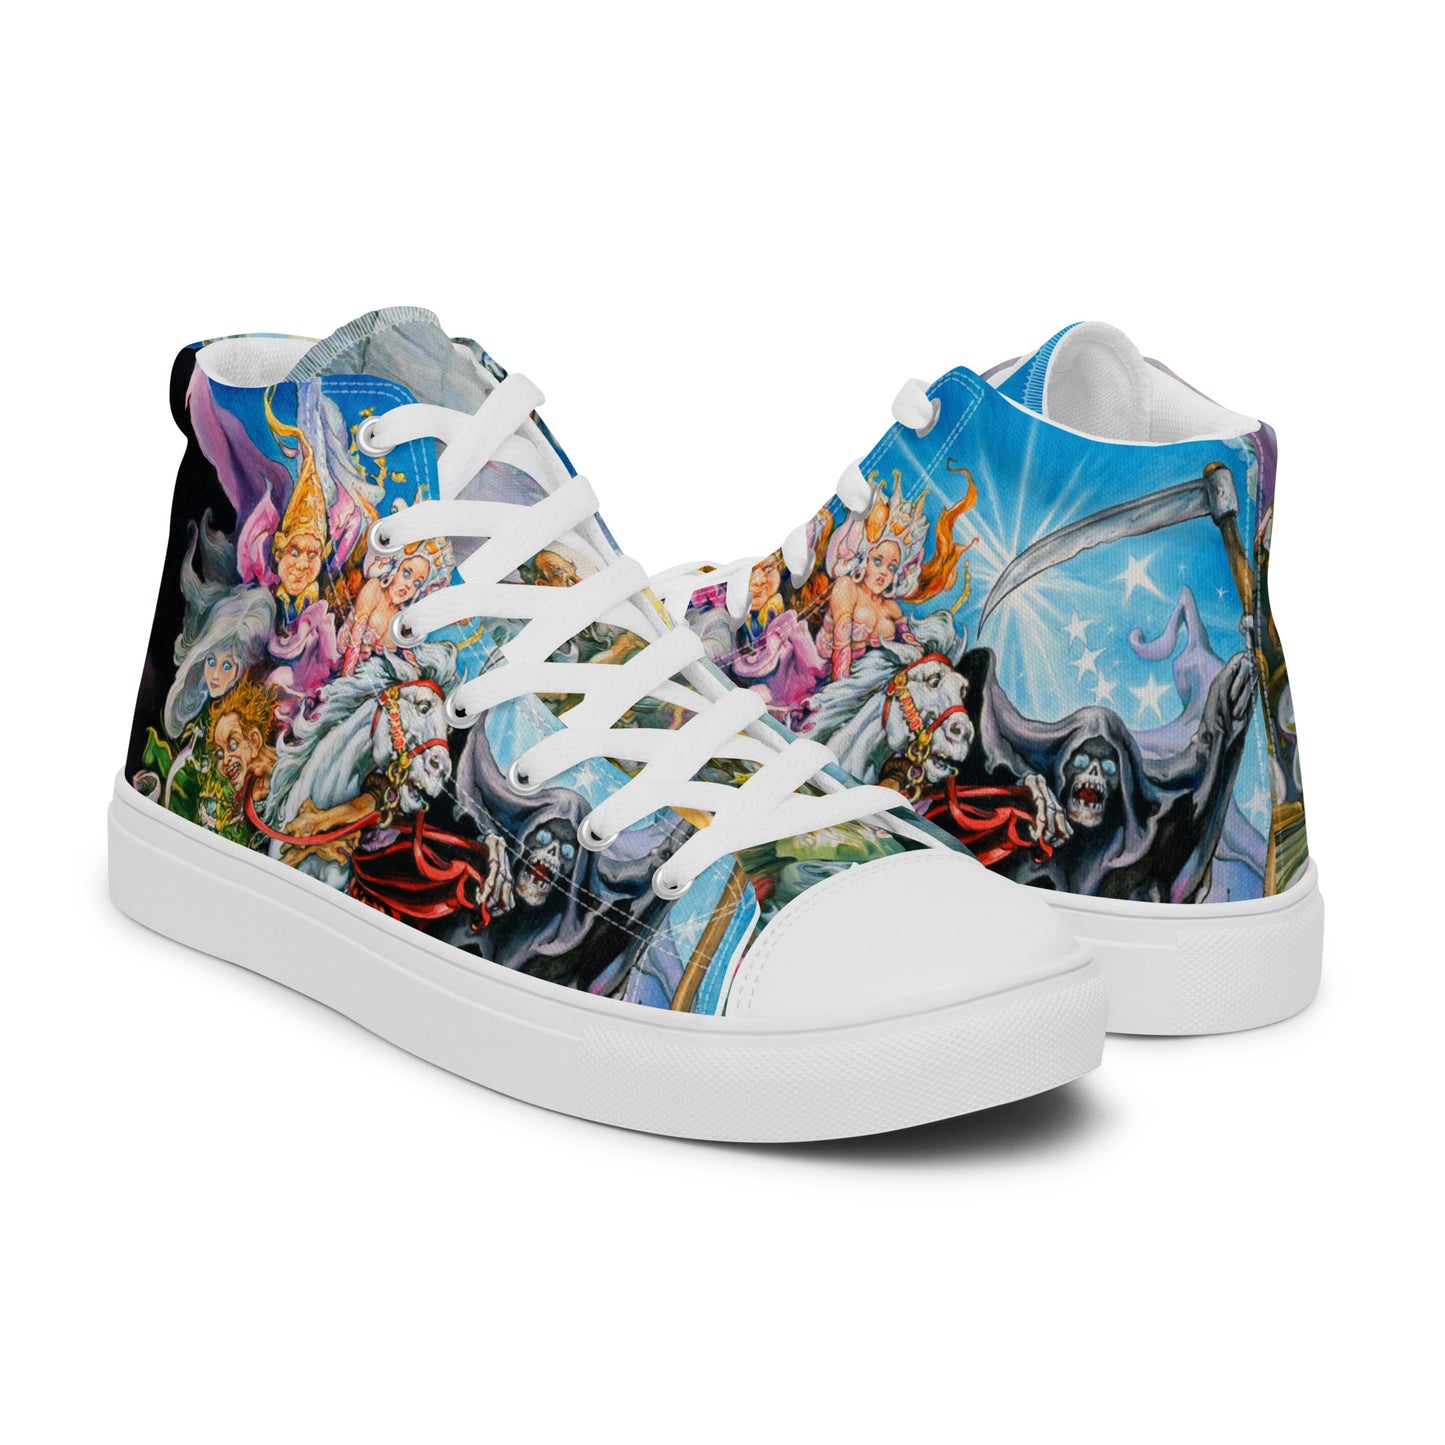 Mort Men’s High Top Canvas Shoes -  Free Shipping! *US SIZES SHOWN! USE CHART!